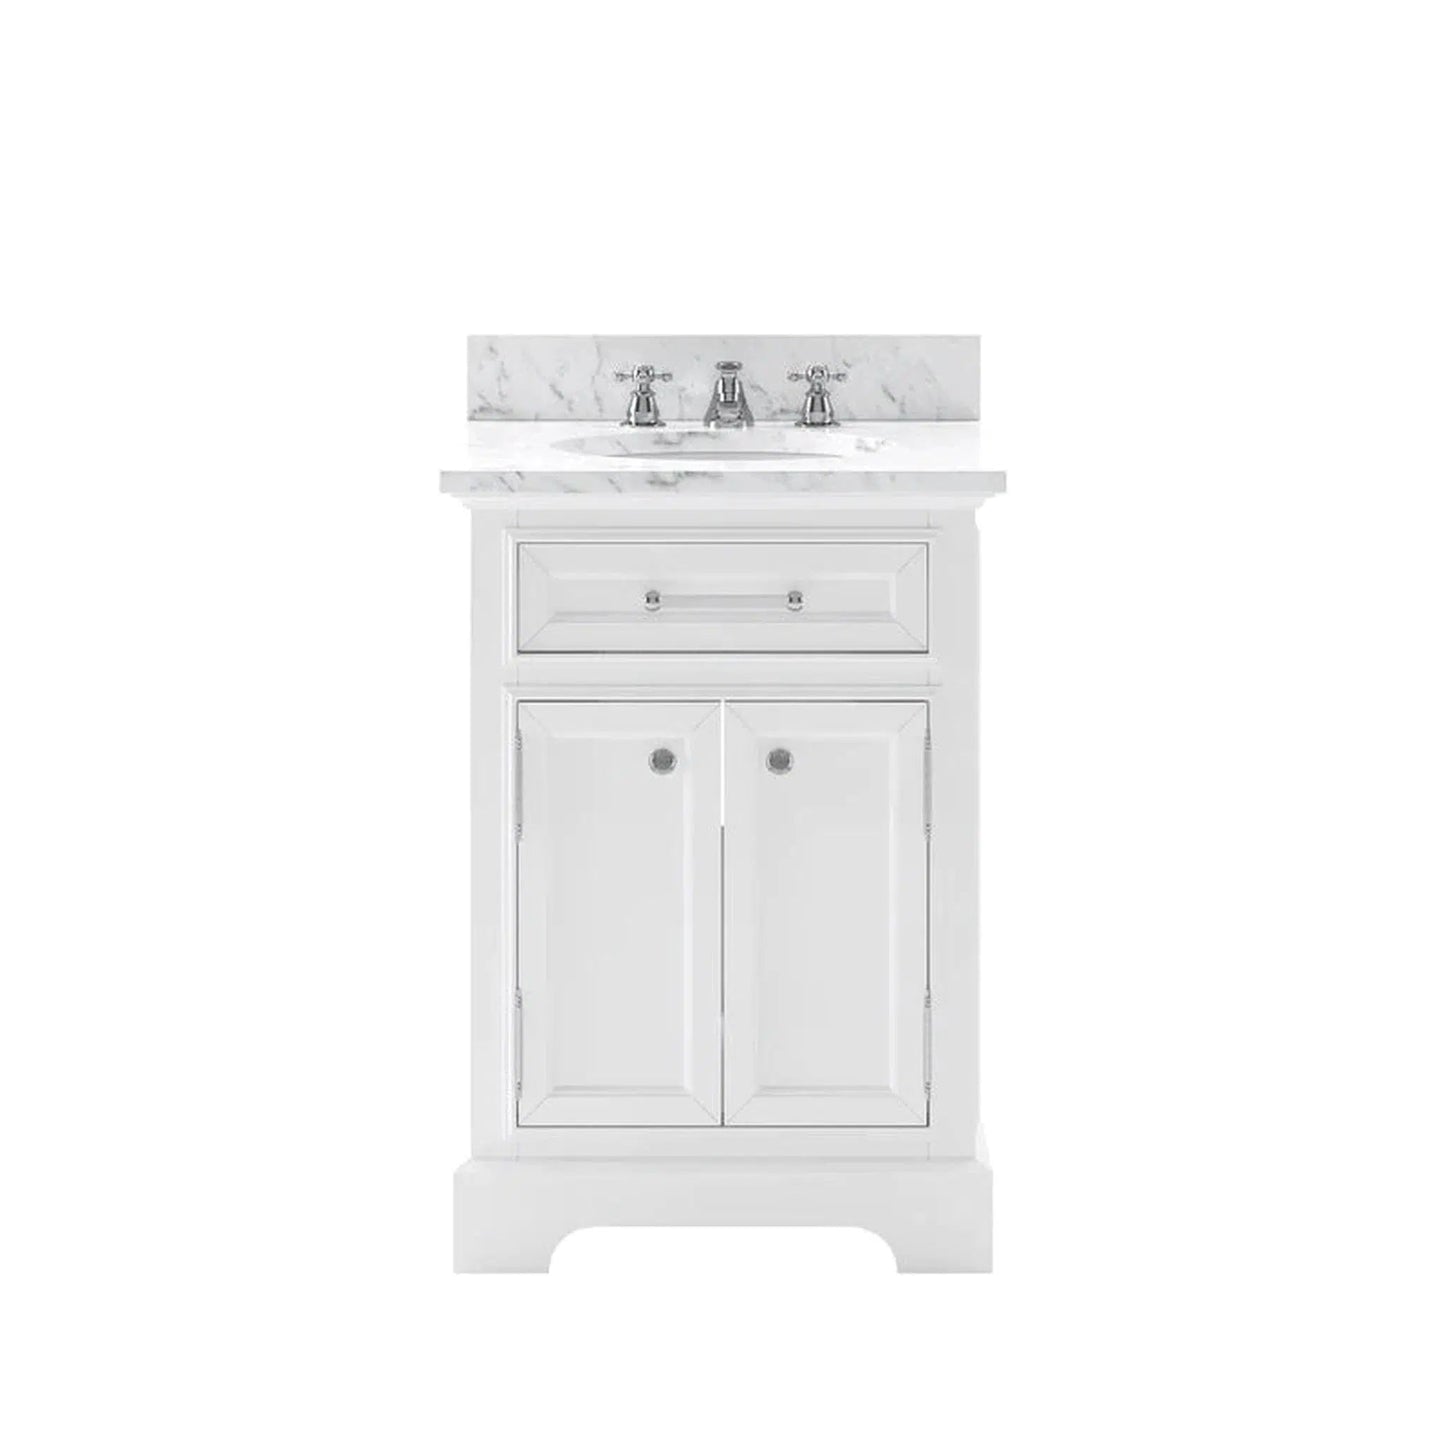 Water Creation 24 Inch Cashmere Grey Single Sink Bathroom Vanity With Matching Framed Mirror And Faucet From The Derby Collection